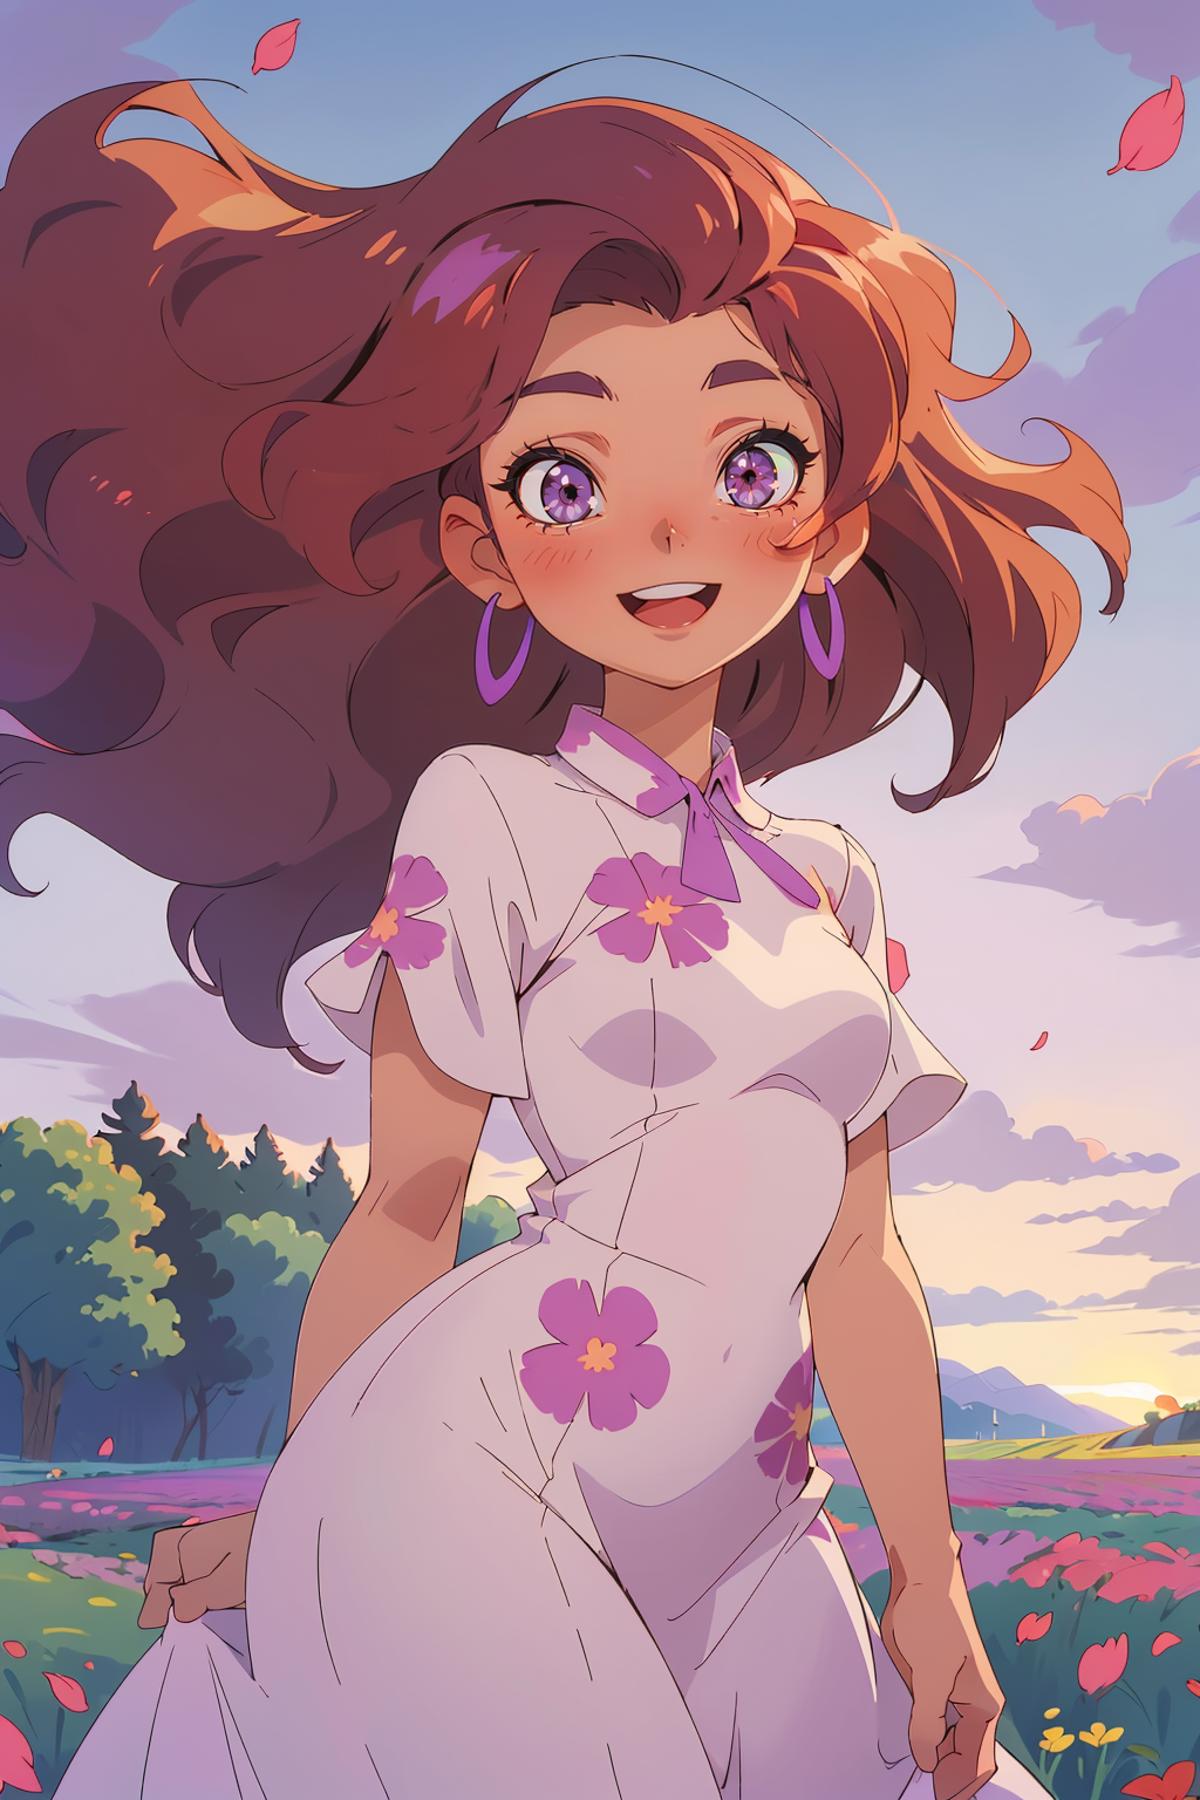 A beautiful cartoon image of a smiling girl wearing a white flowered dress.